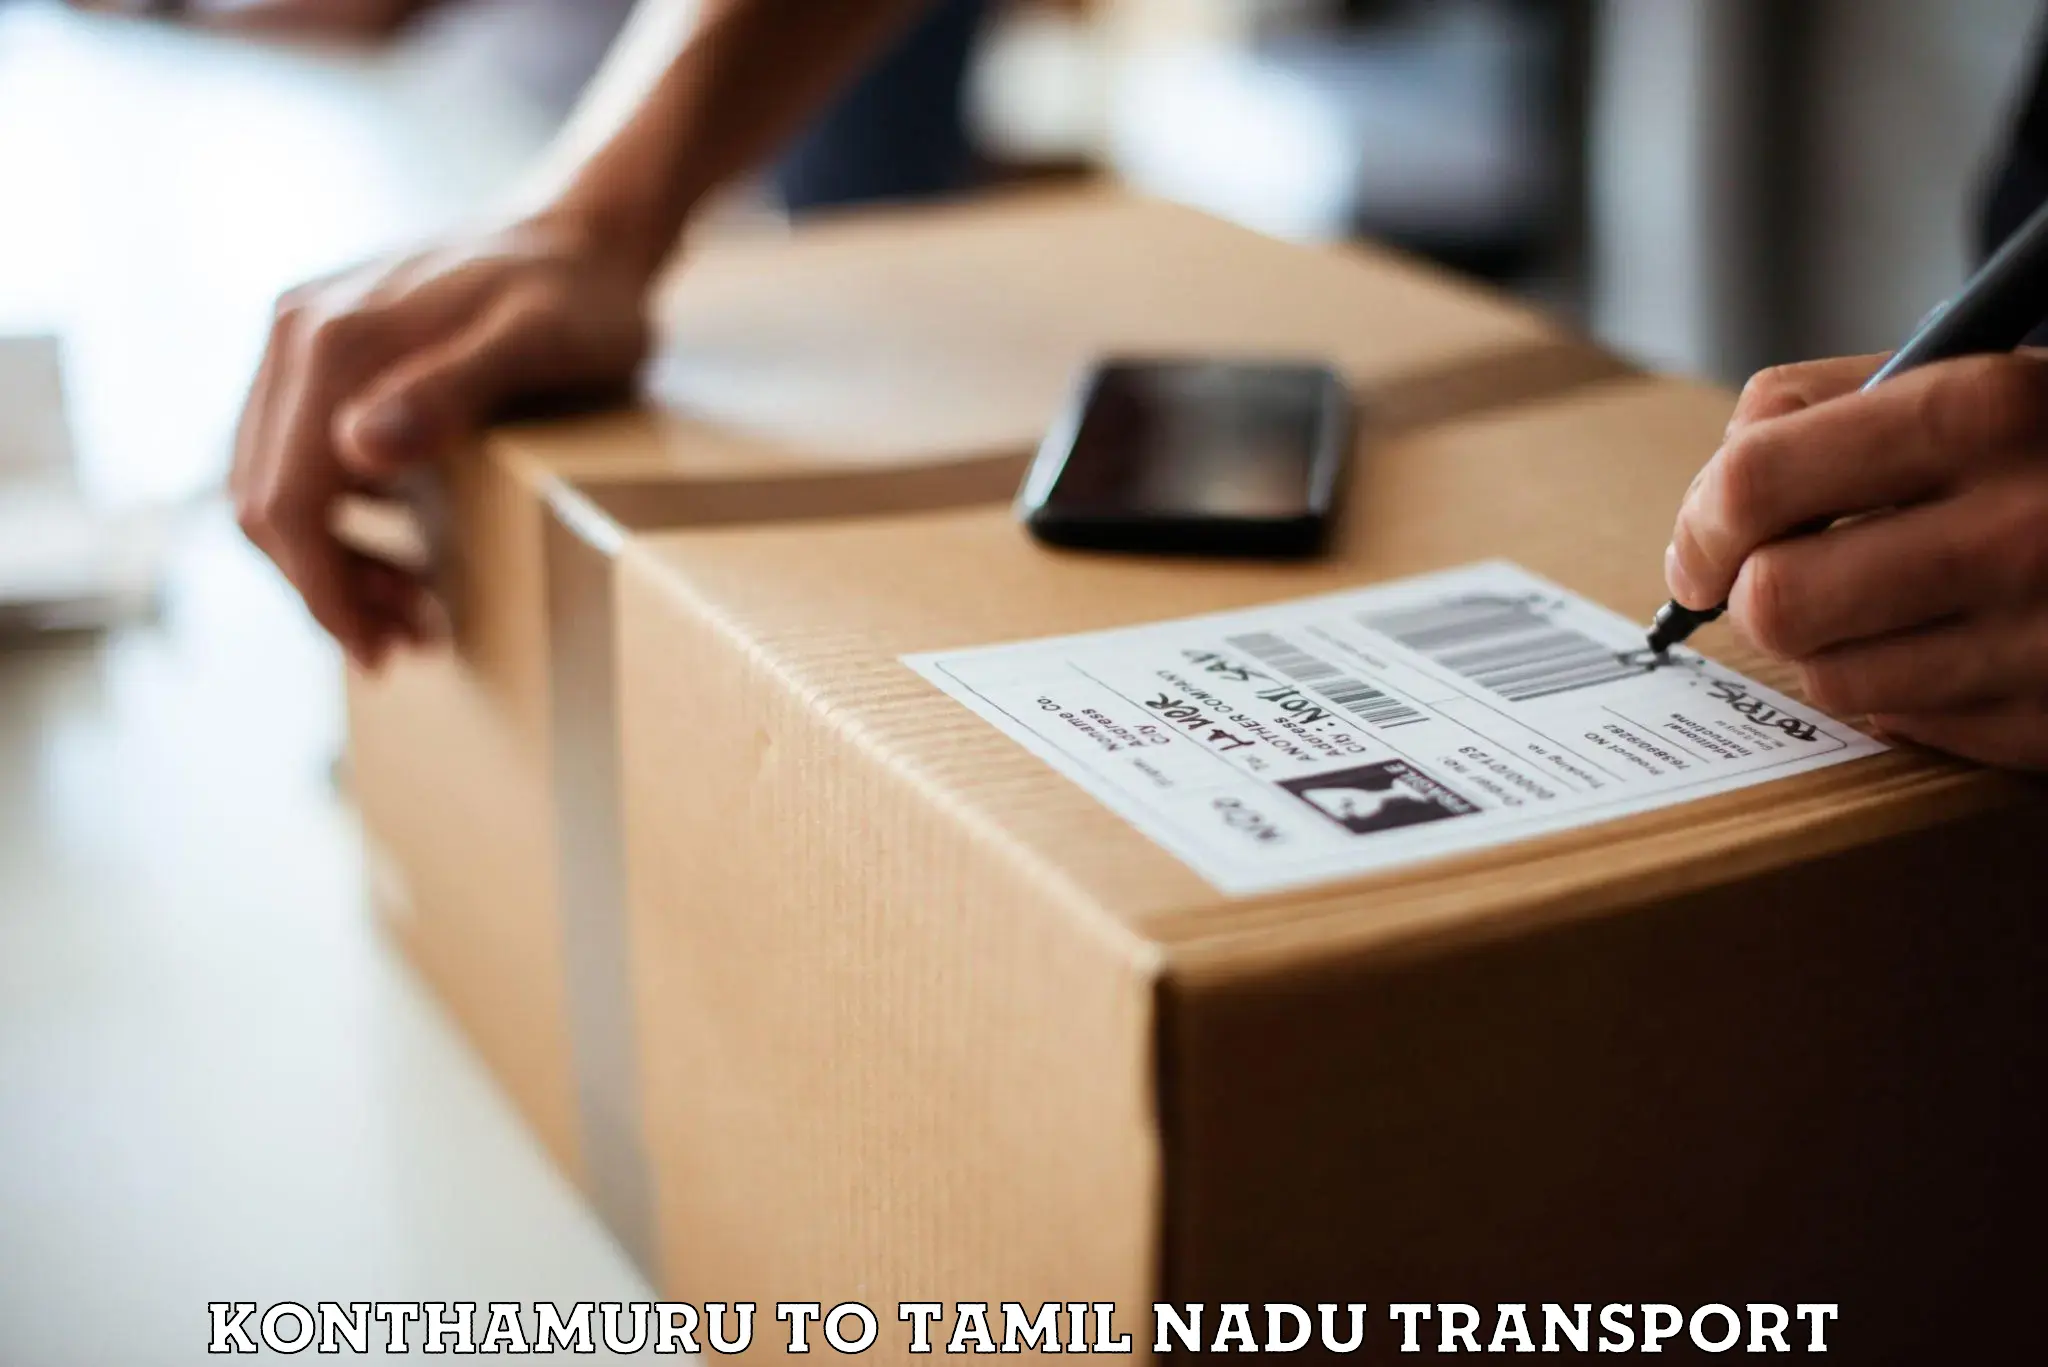 Vehicle courier services Konthamuru to Coimbatore